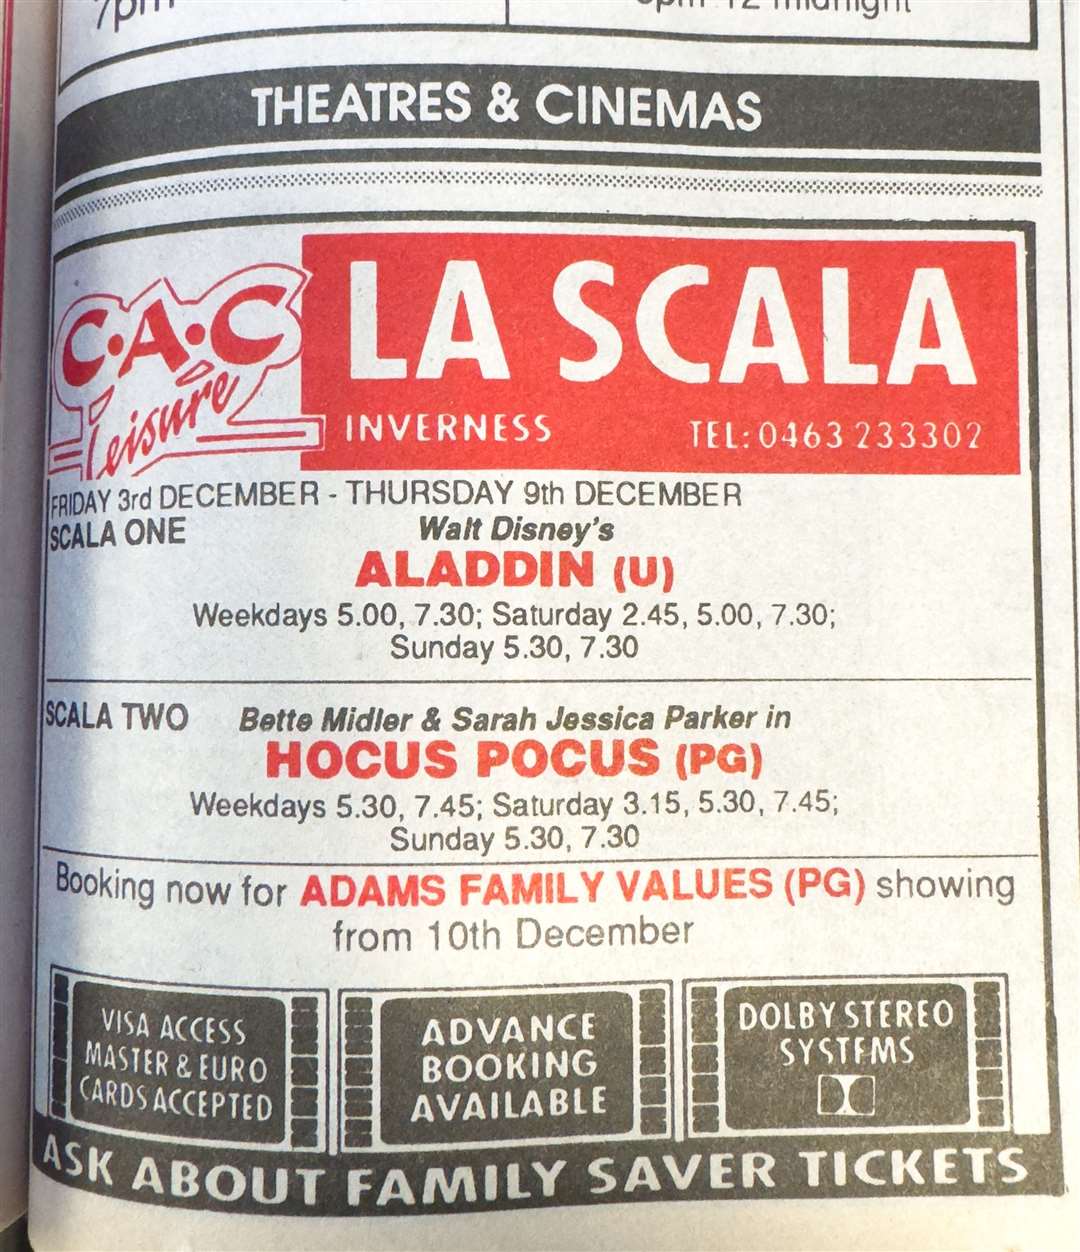 The newly-released film, Aladdin, was showing at La Scala.